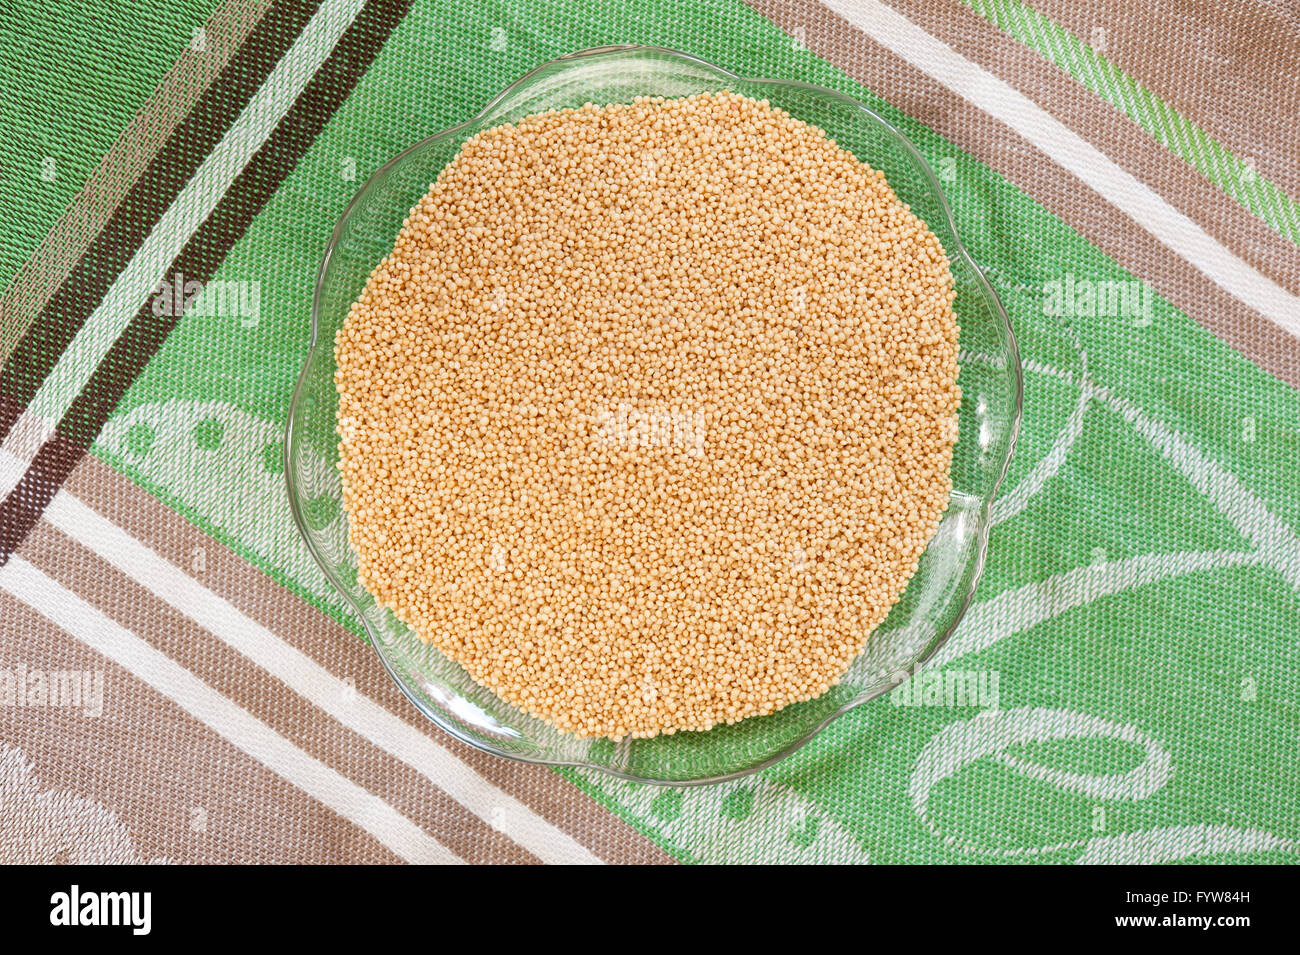 Tiny amaranthus grains lying on glass saucer on green cloth, raw product healthy food staple, portion of plant seeds top view. Stock Photo